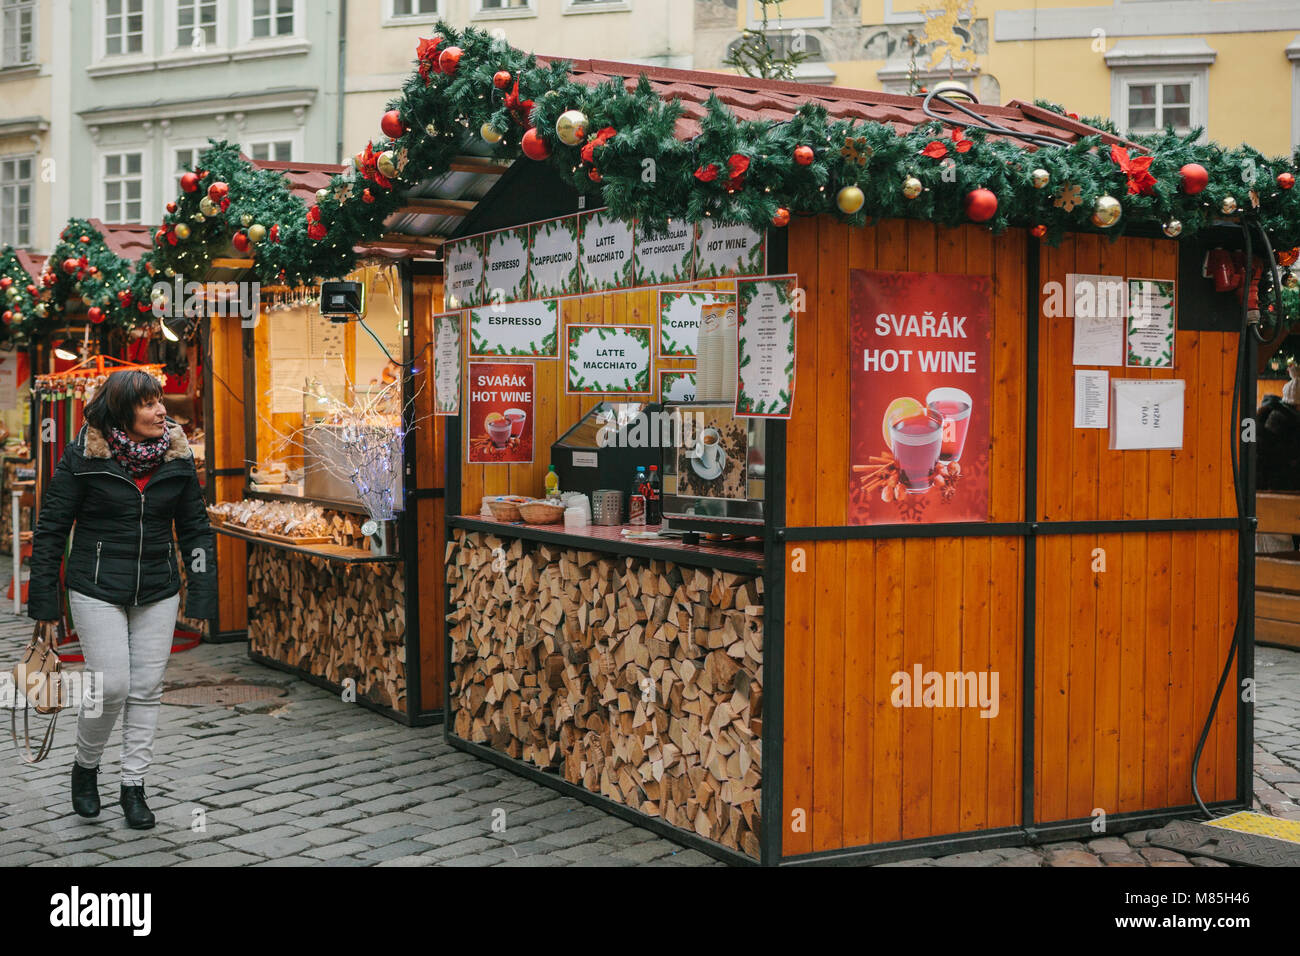 Prague, December 13, 2016: Old Town Square in Prague on Christmas Day. Christmas market in the main square of the city. The woman looks with amazement Stock Photo